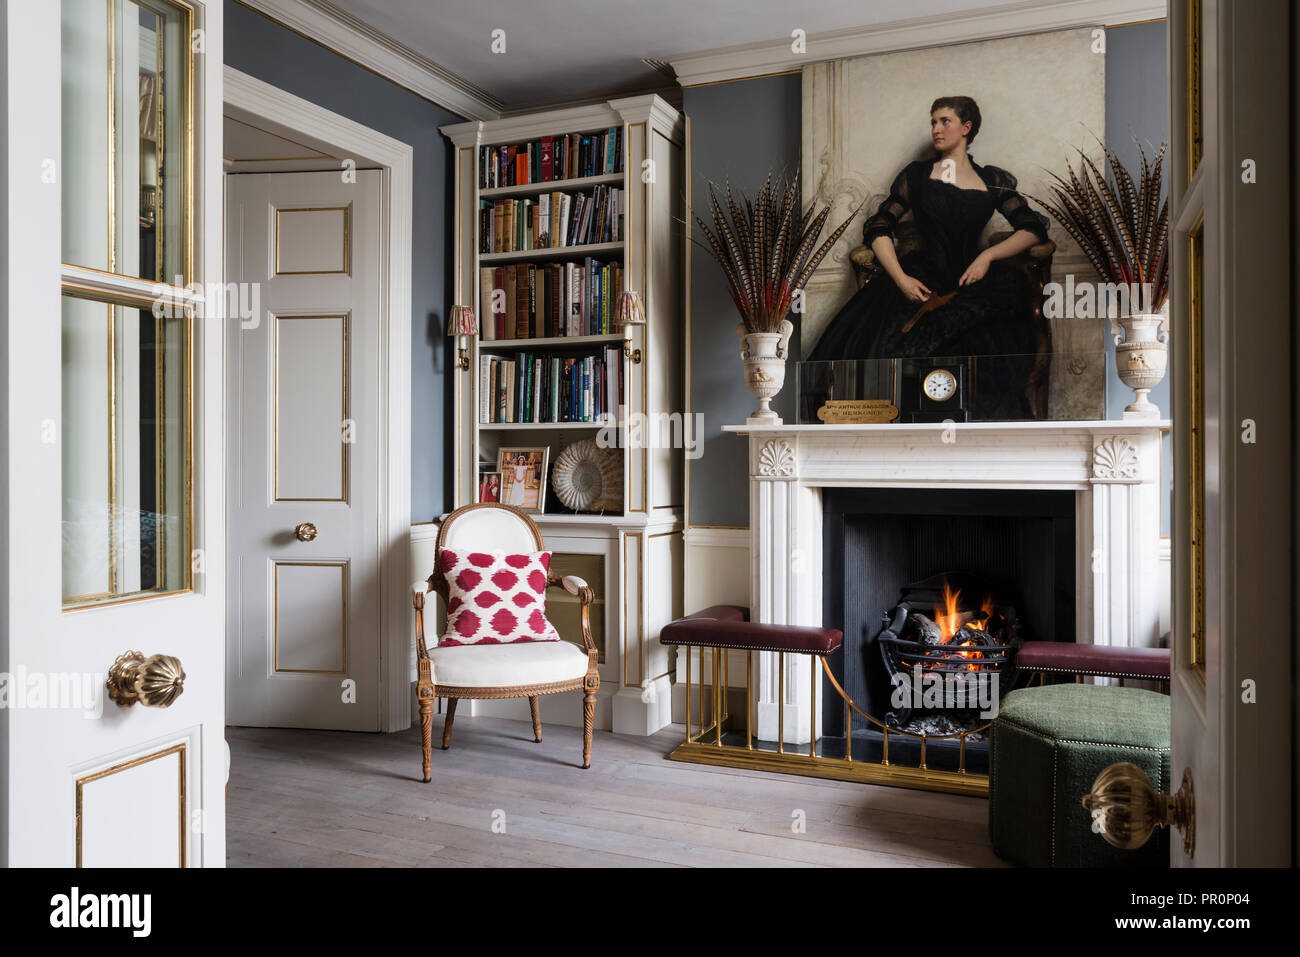 Portarit of Victorian socialite Mrs Sassoon above fireplace with pheasant feathers Stock Photo